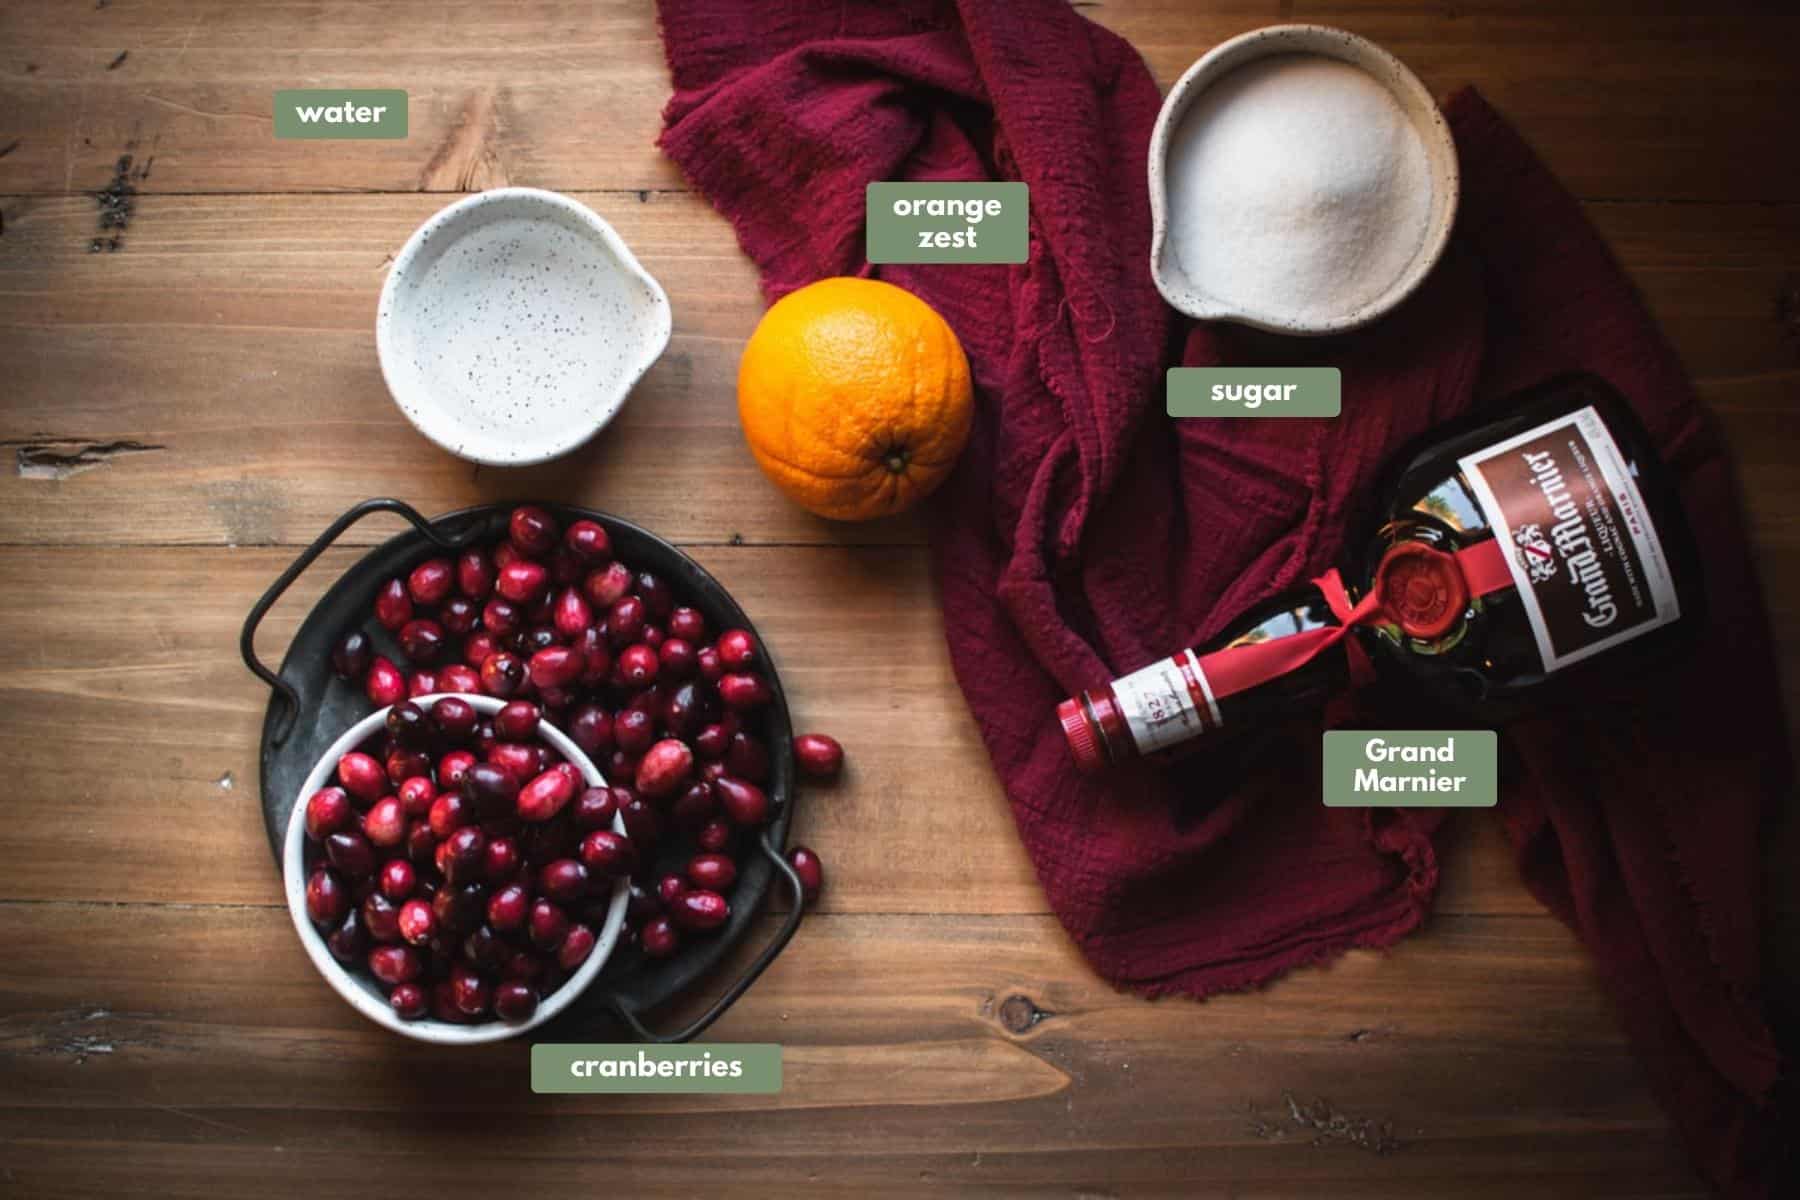 The ingredients required for this recipe lying on a wooden table. There is a whie terrazzo bowl with water inside and a black cast iron bowl filled with cranberries. A whole orange lies next to some red fabric draped over the corner of the table where a bottle of Grand Marnier sits next to a bowl of white sugar. 